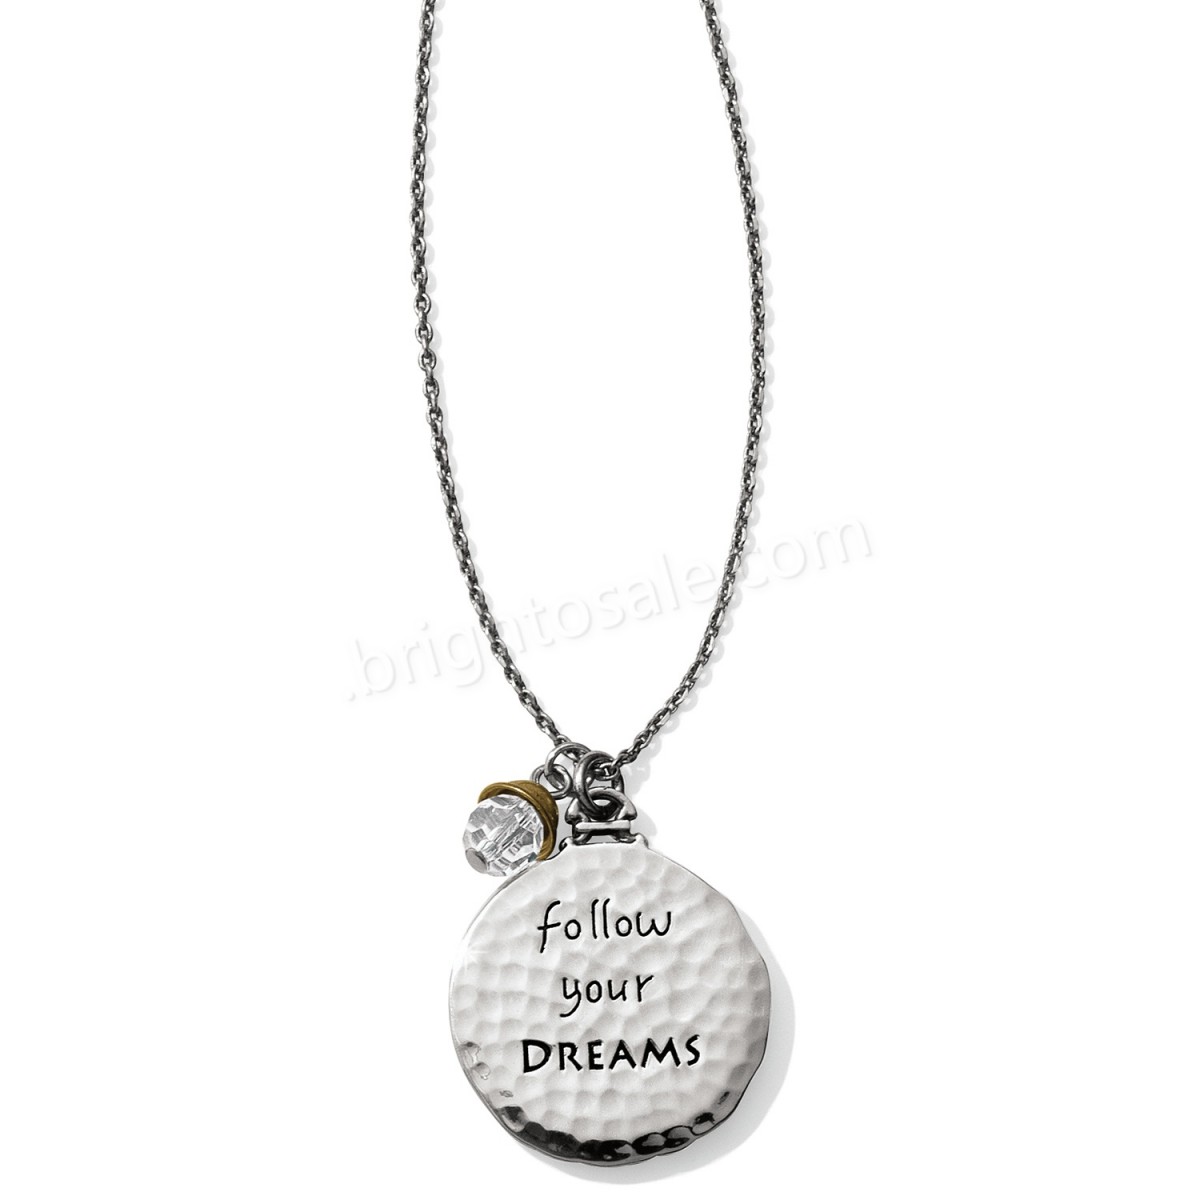 Brighton Collectibles & Online Discount Stars For The Soul Dreams Necklace - -1